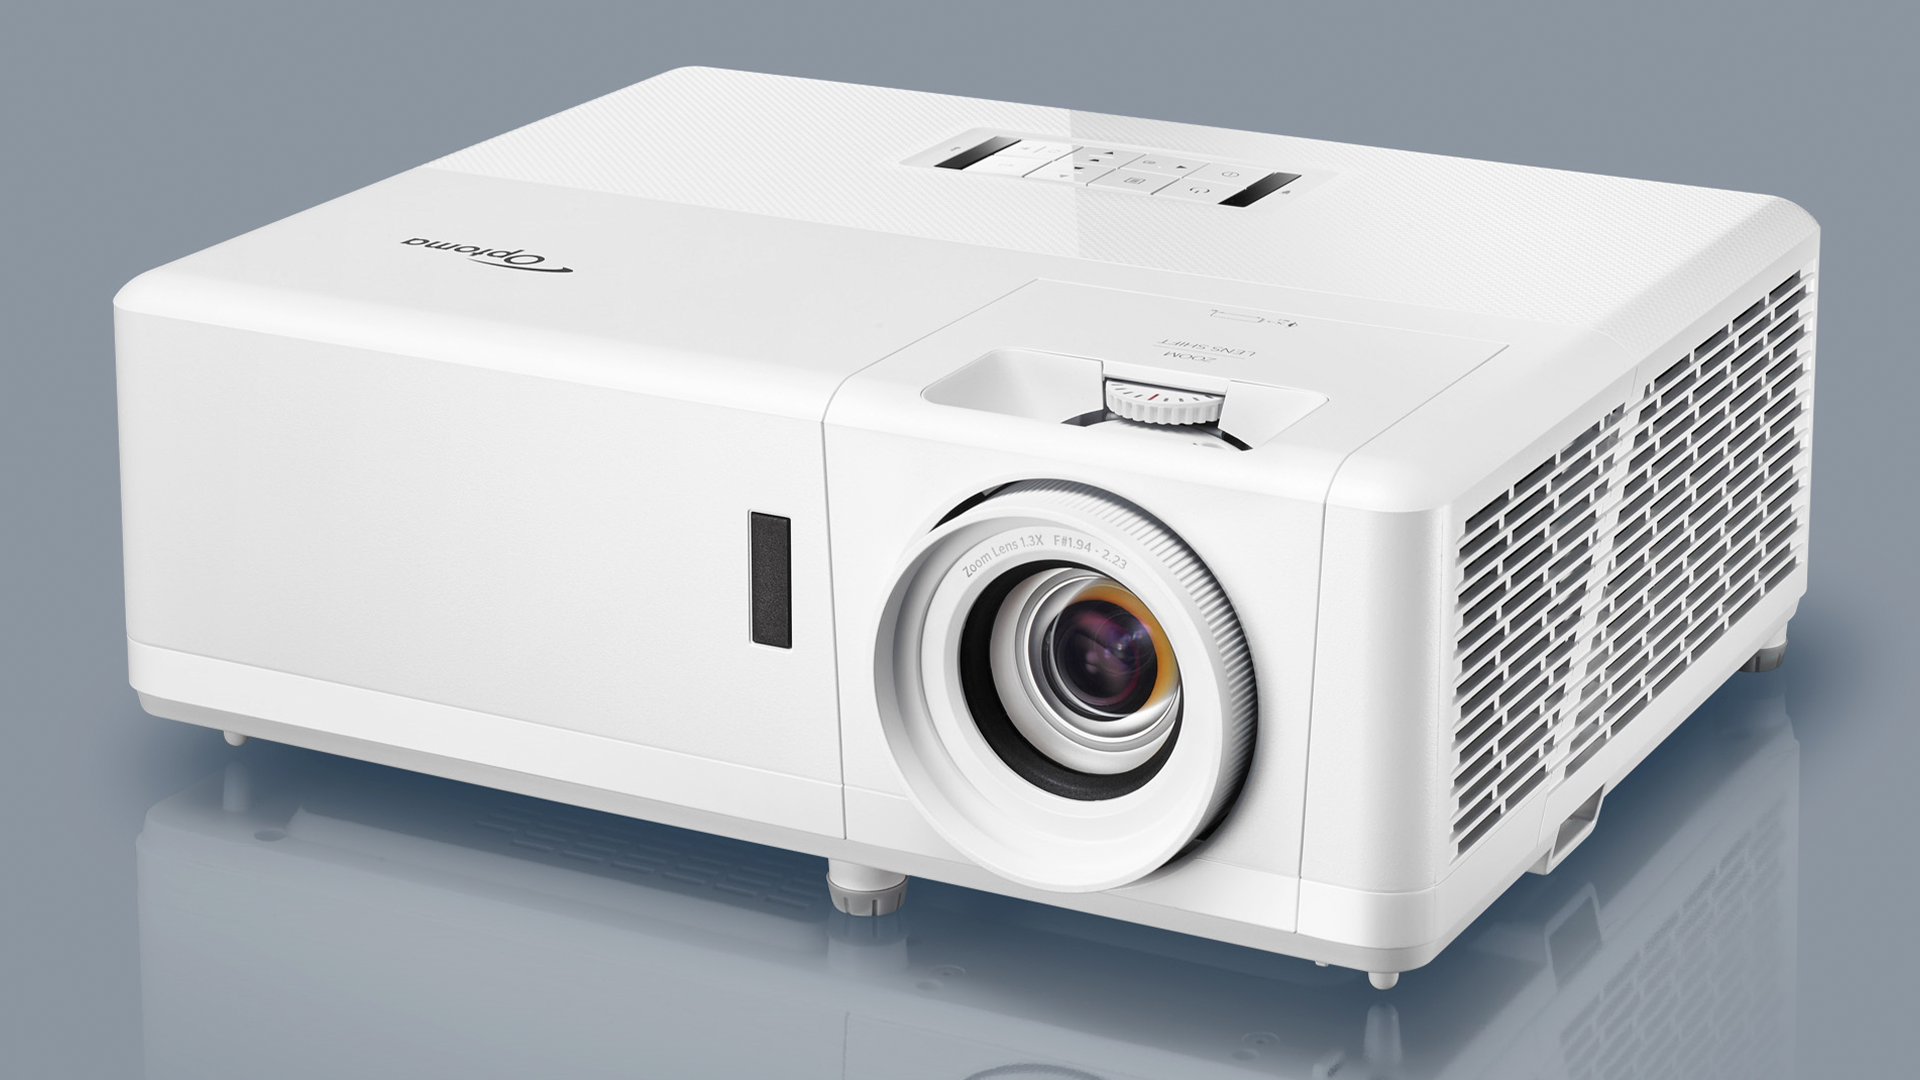 A photo of the Optoma UHZ50 projector on a blue background.